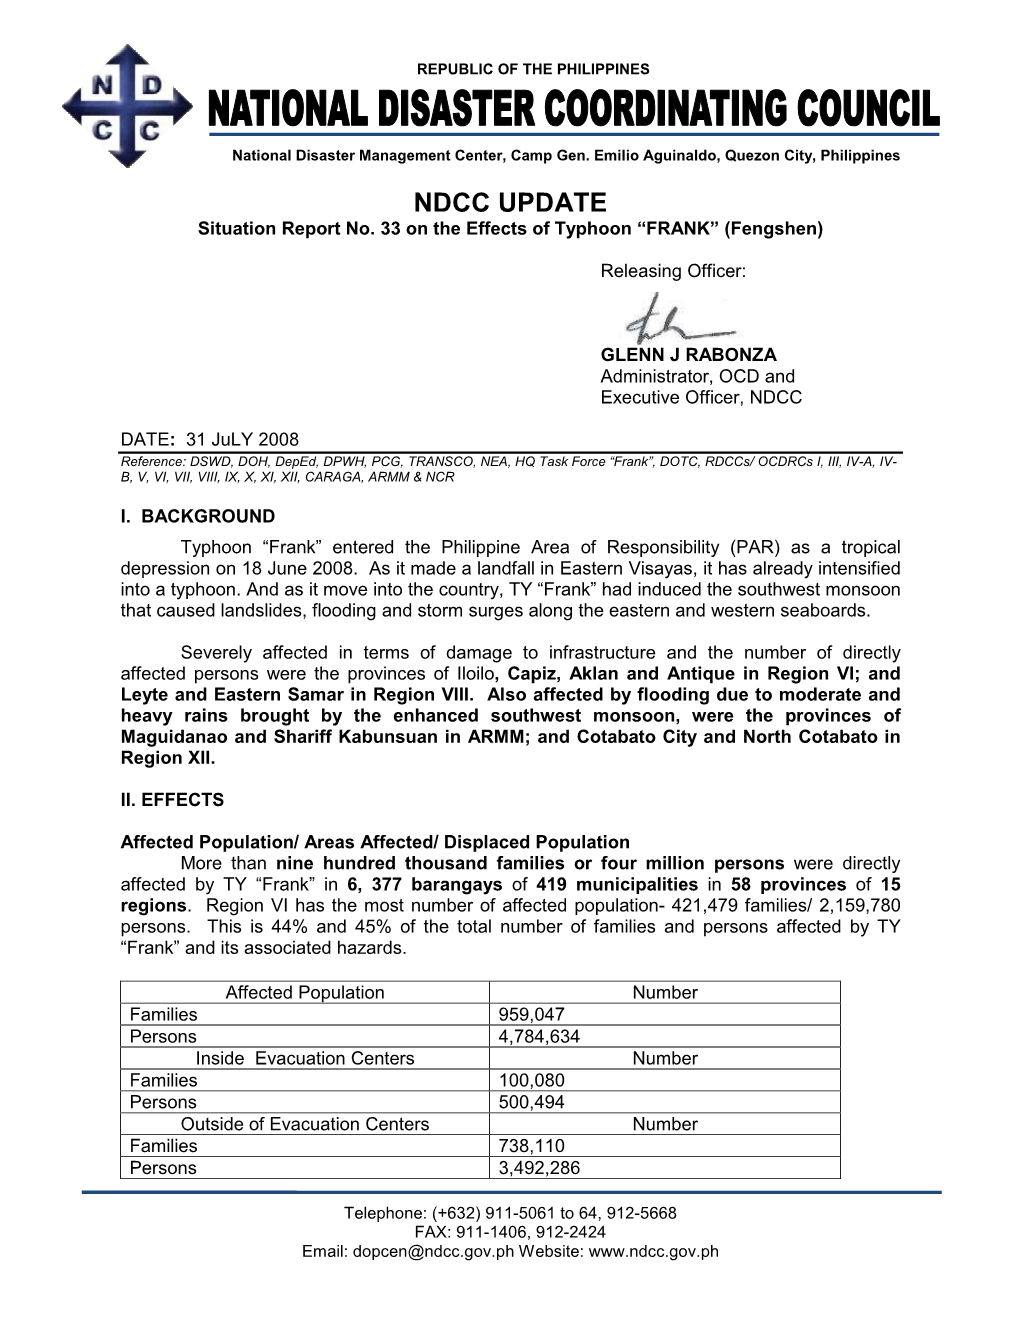 NDCC UPDATE Situation Report No